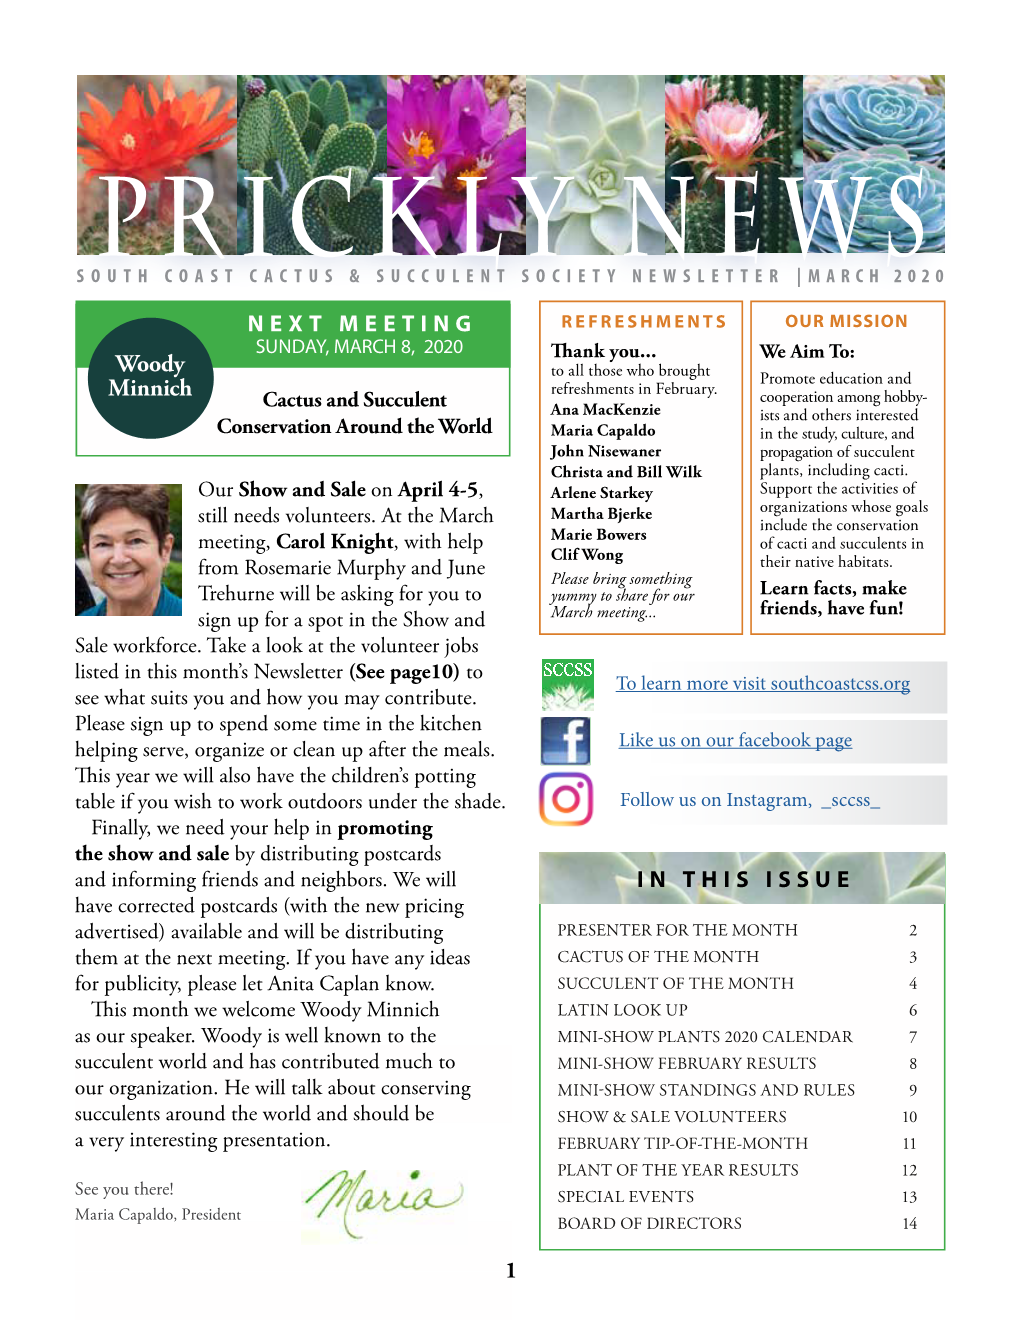 Prickly News South Coast Cactus & Succulent Society Newsletter | March 2020